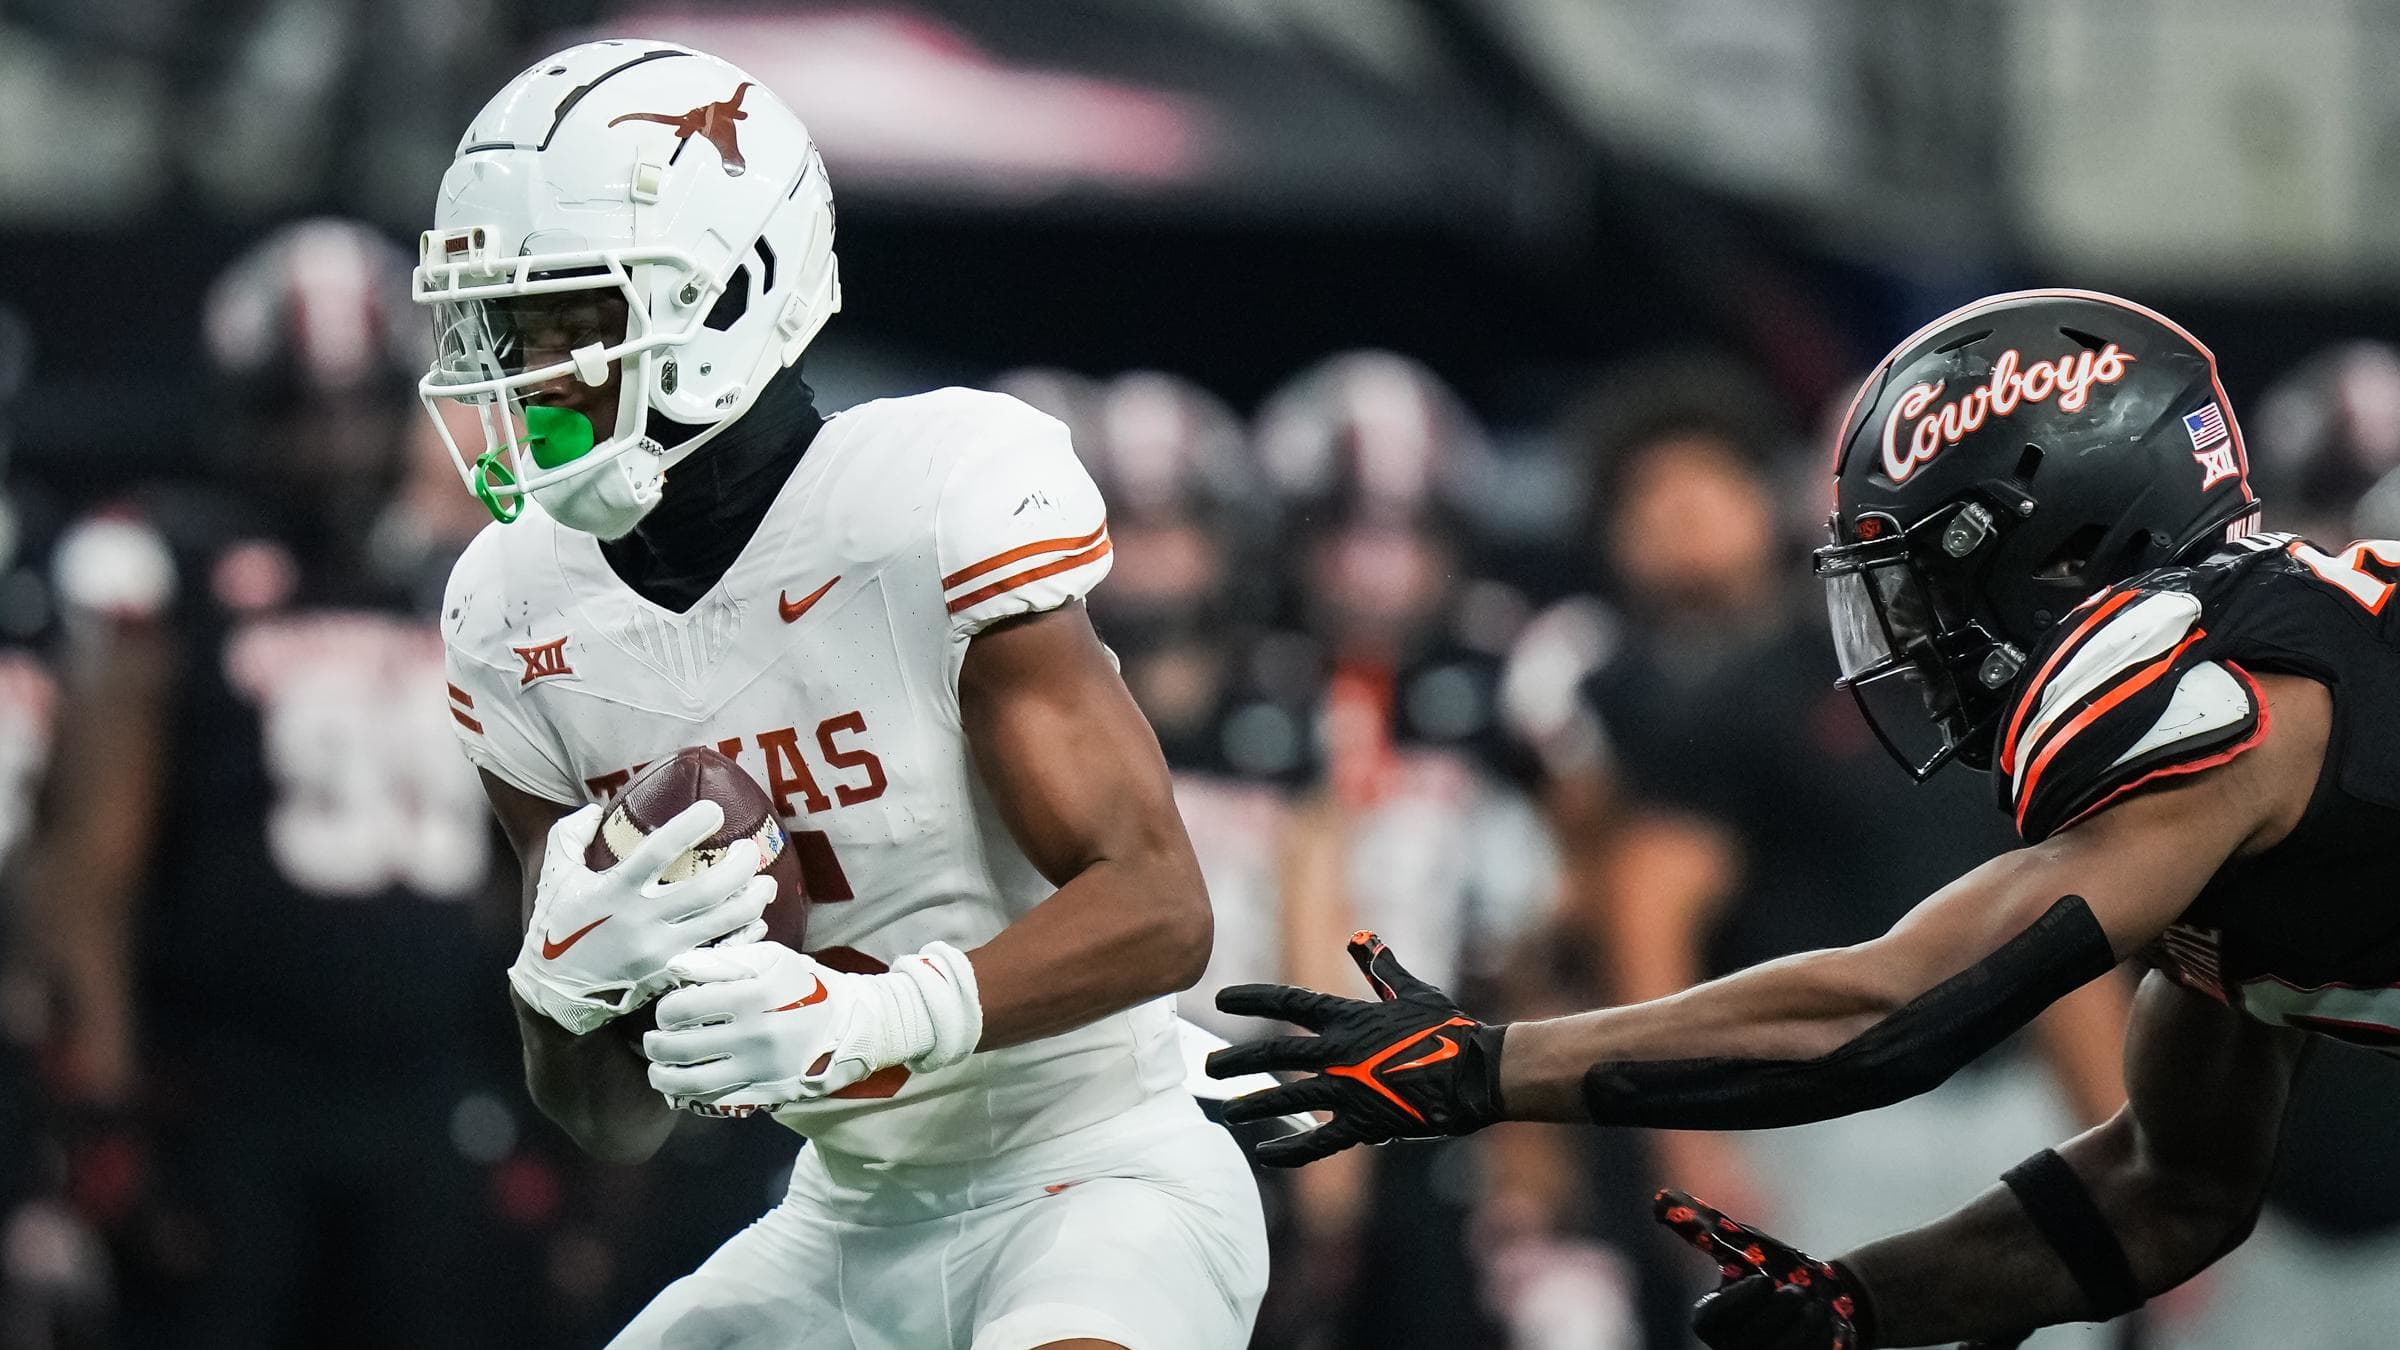 Texas Longhorns WR Adonai Mitchell Selected No. 52 Overall After Major Draft Slide